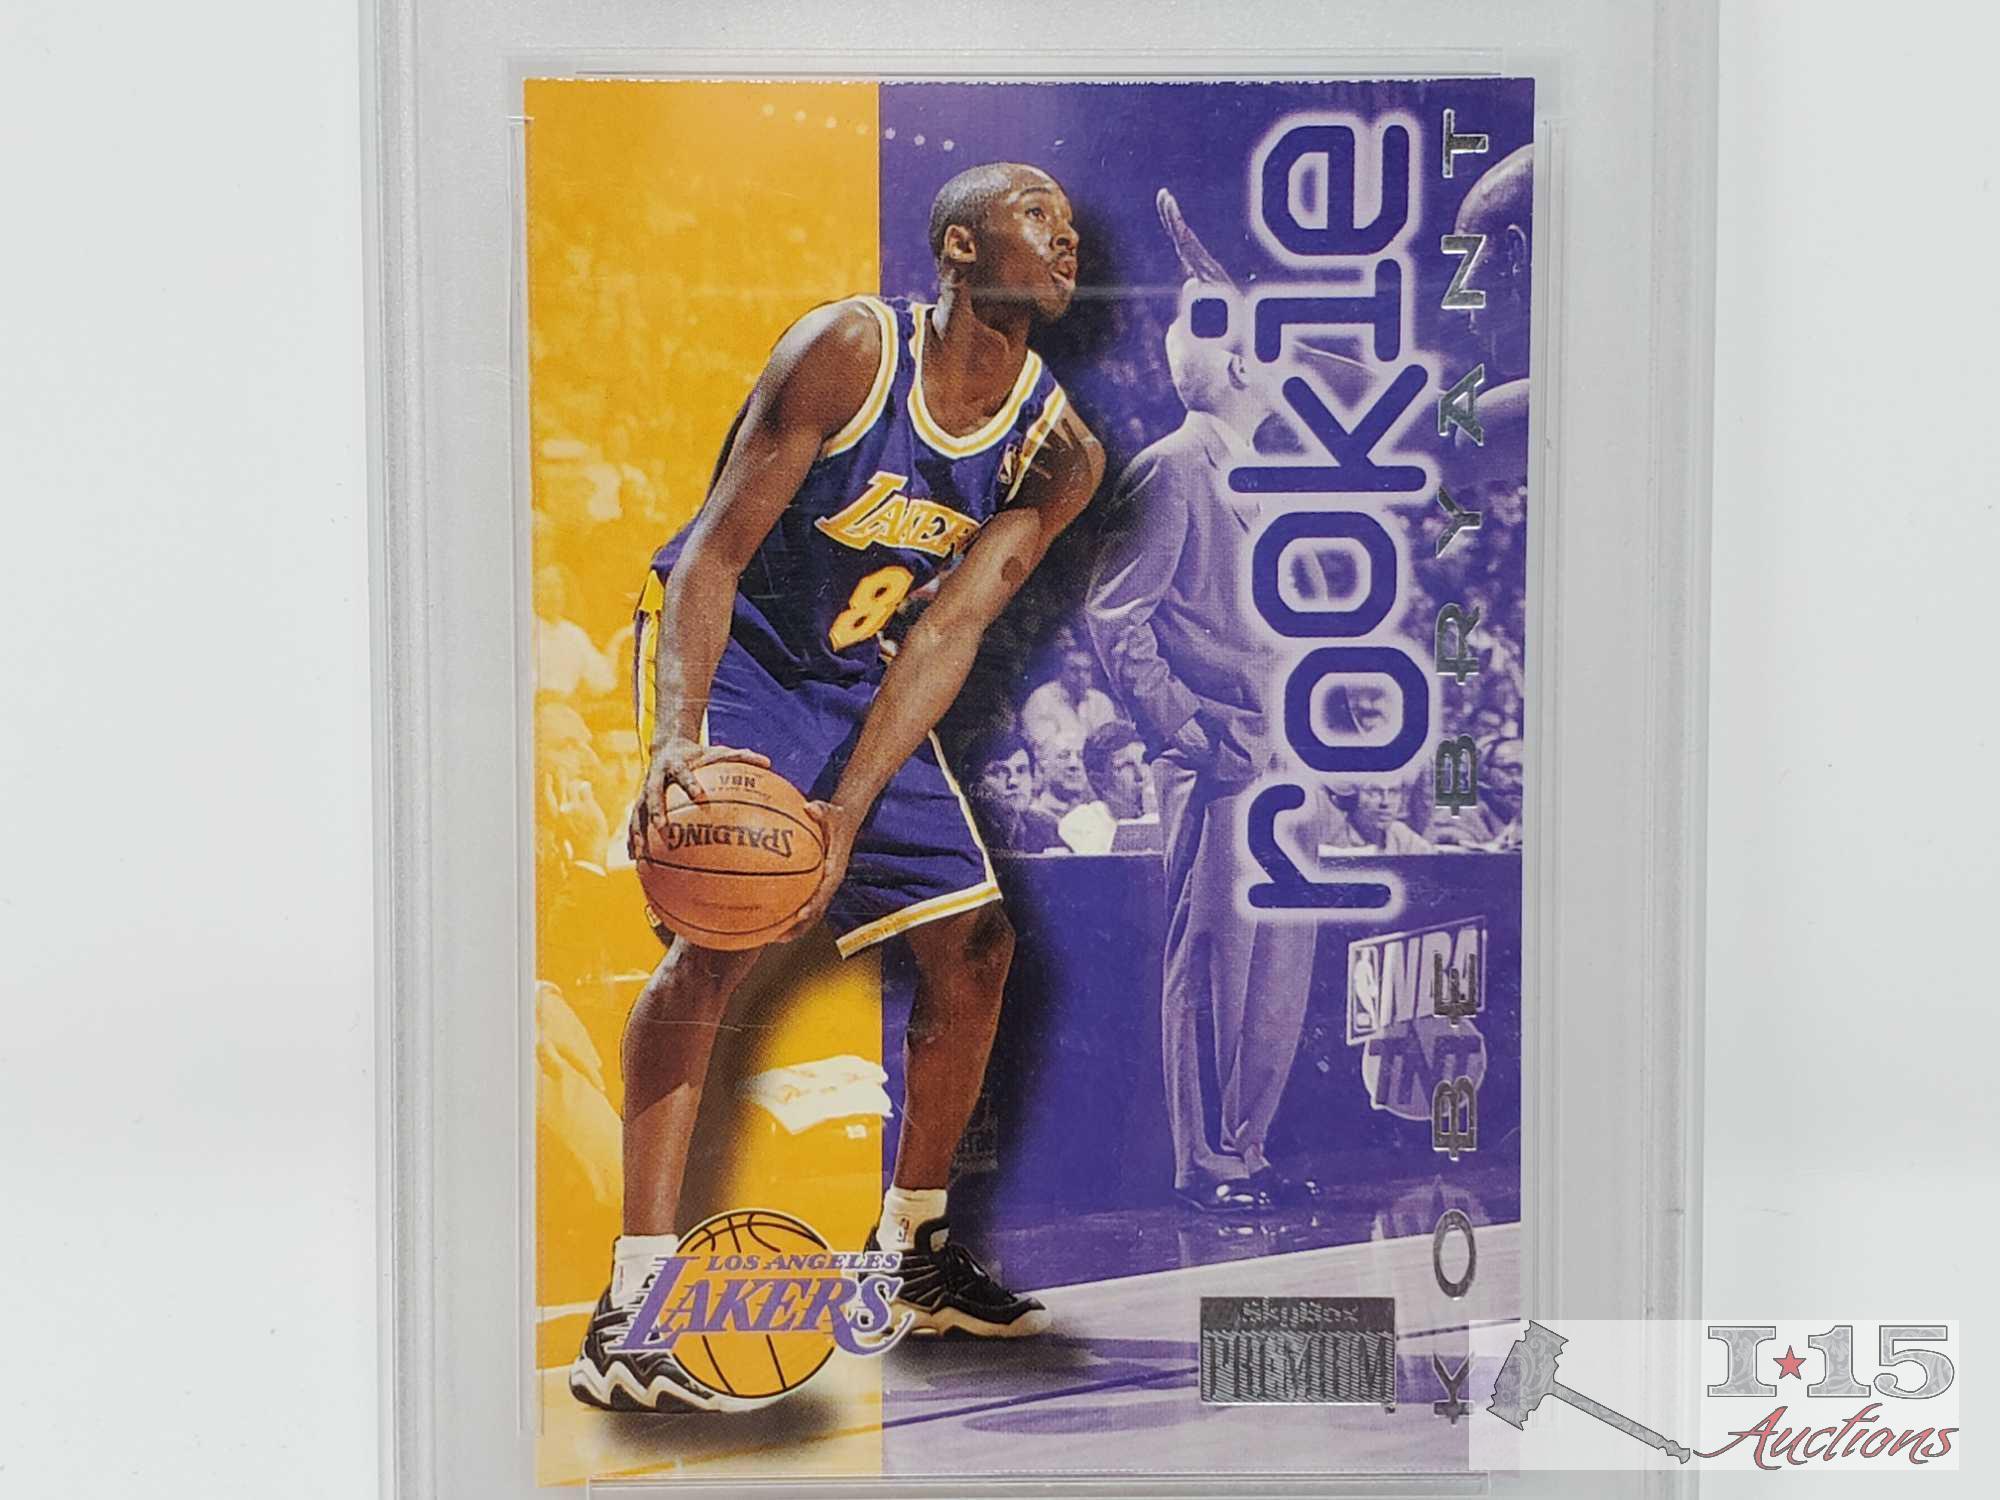 1996-97 Skybox Premium and Hoops Pro Graded Kobe Bryant Rookie Cards